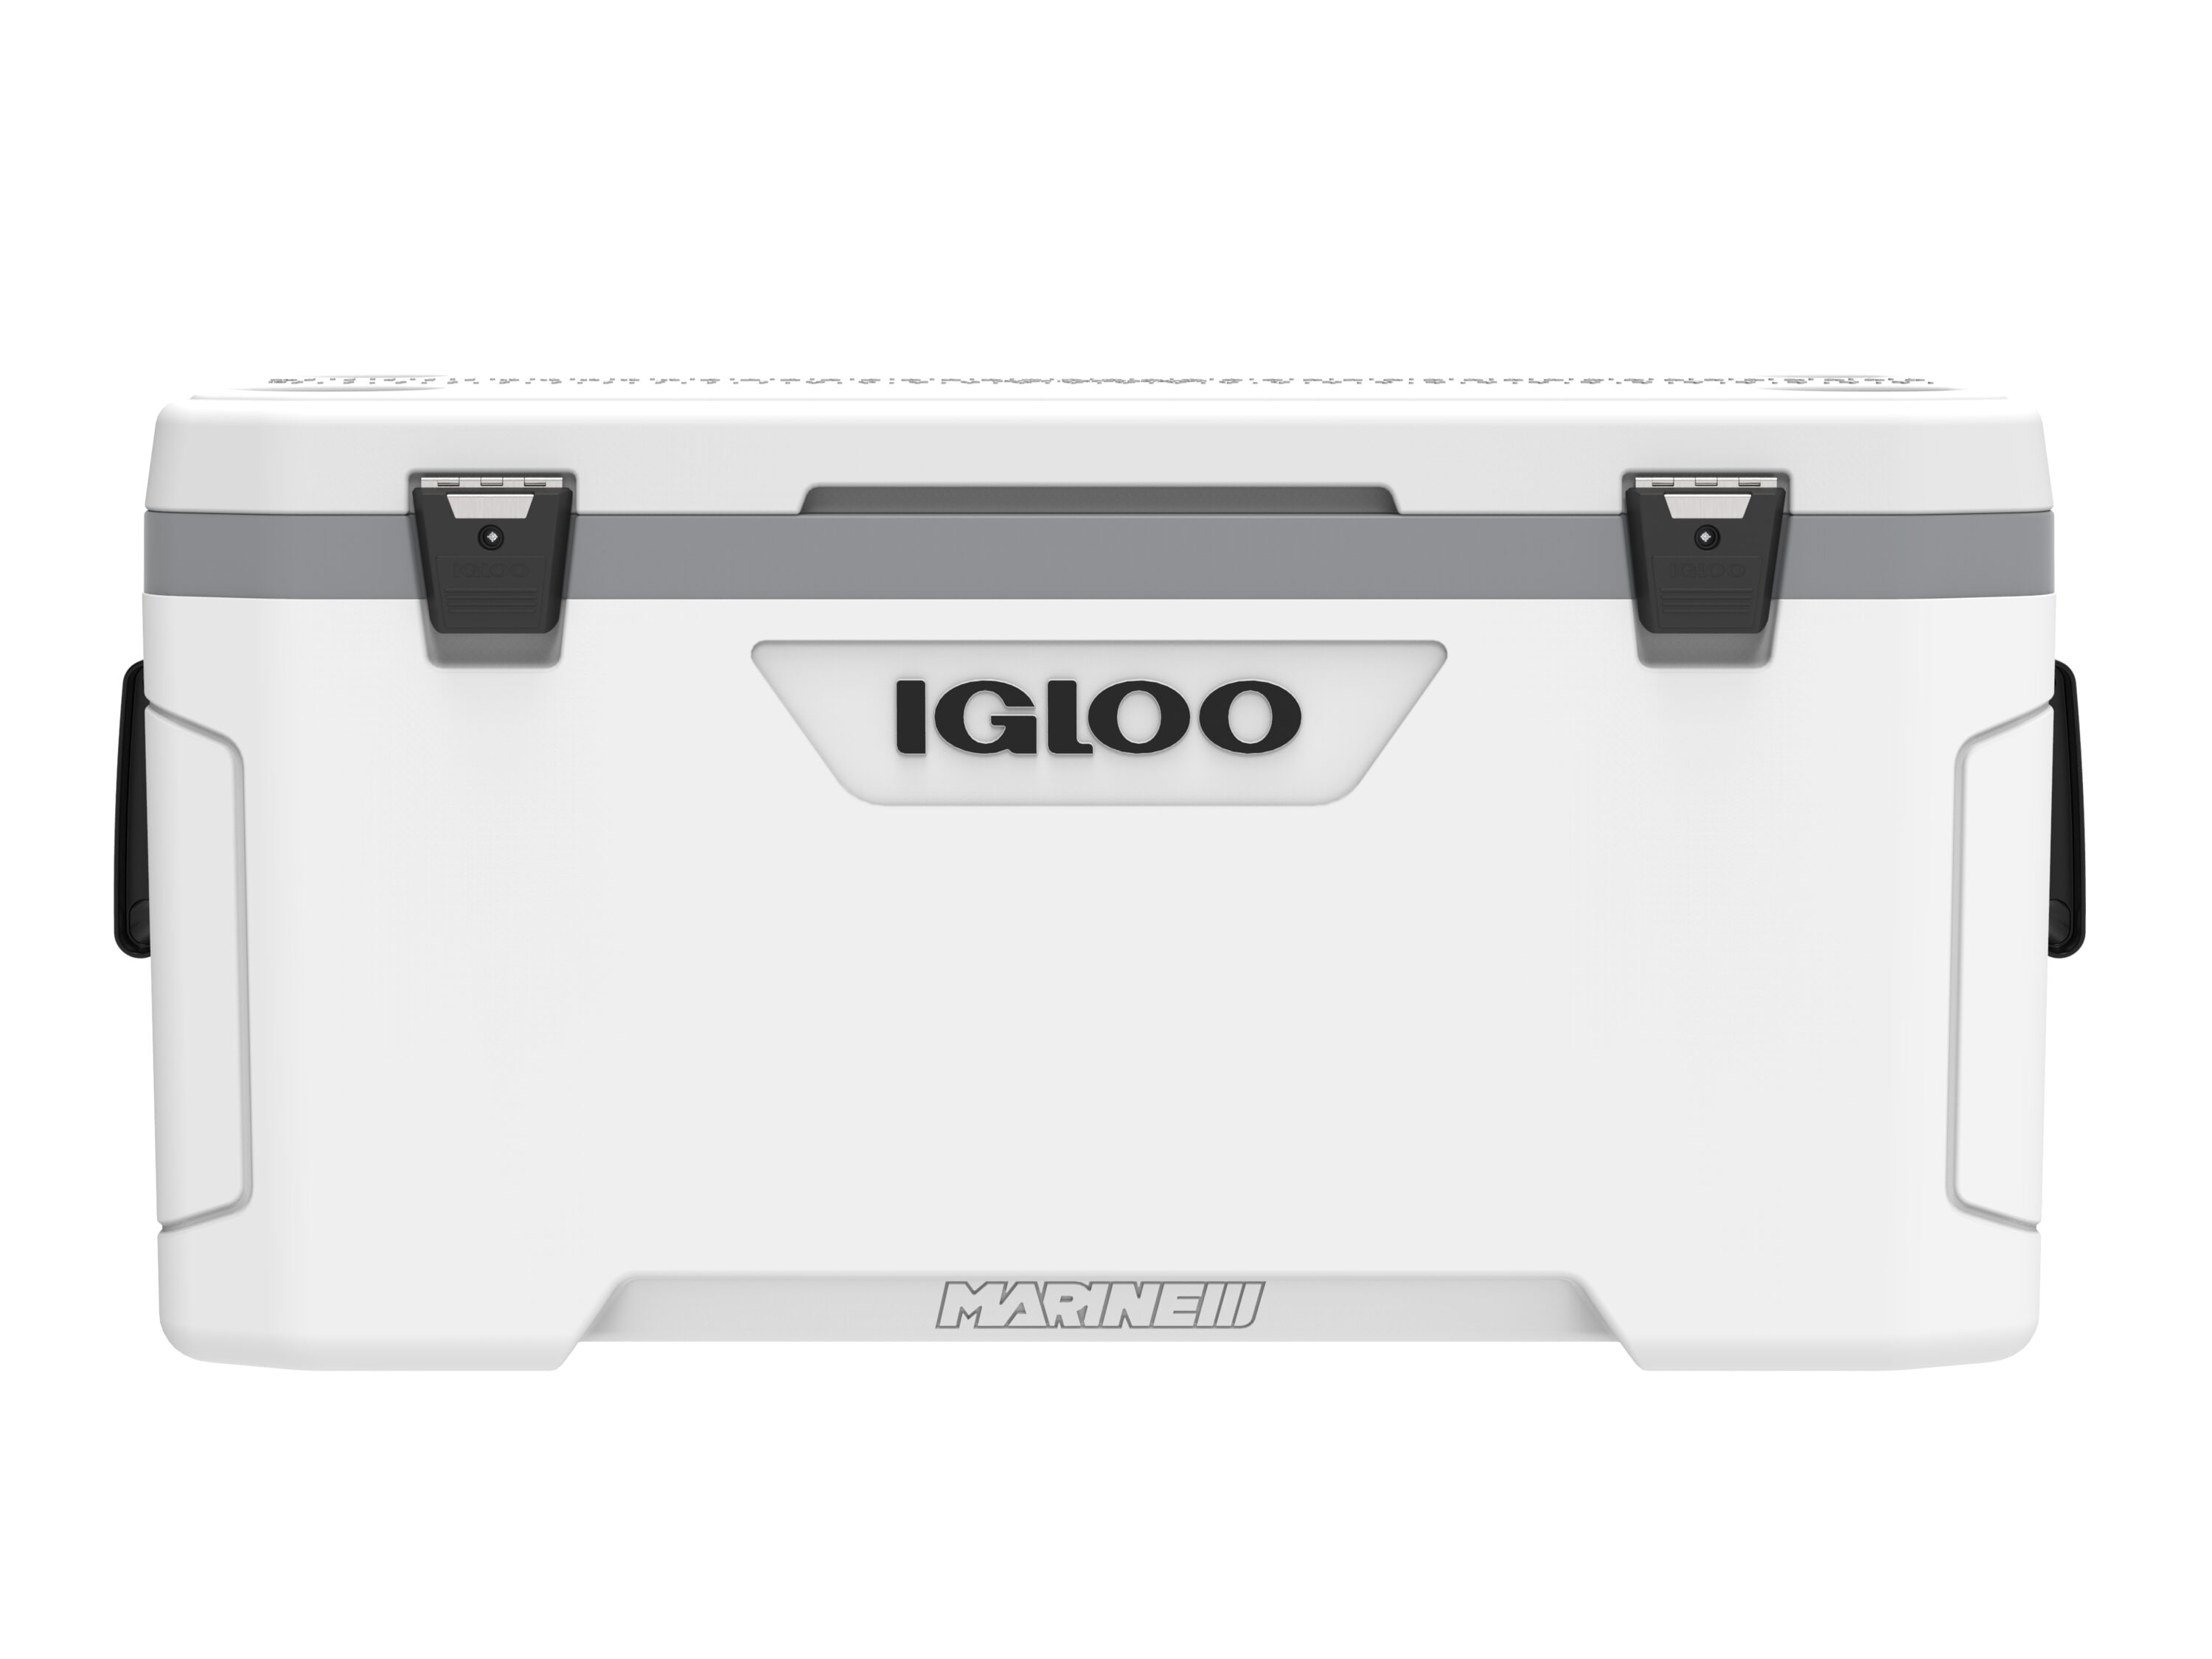 Igloo Wht.Mnscpe Gry.Wht.Blk 100-Quart Insulated Marine Cooler in